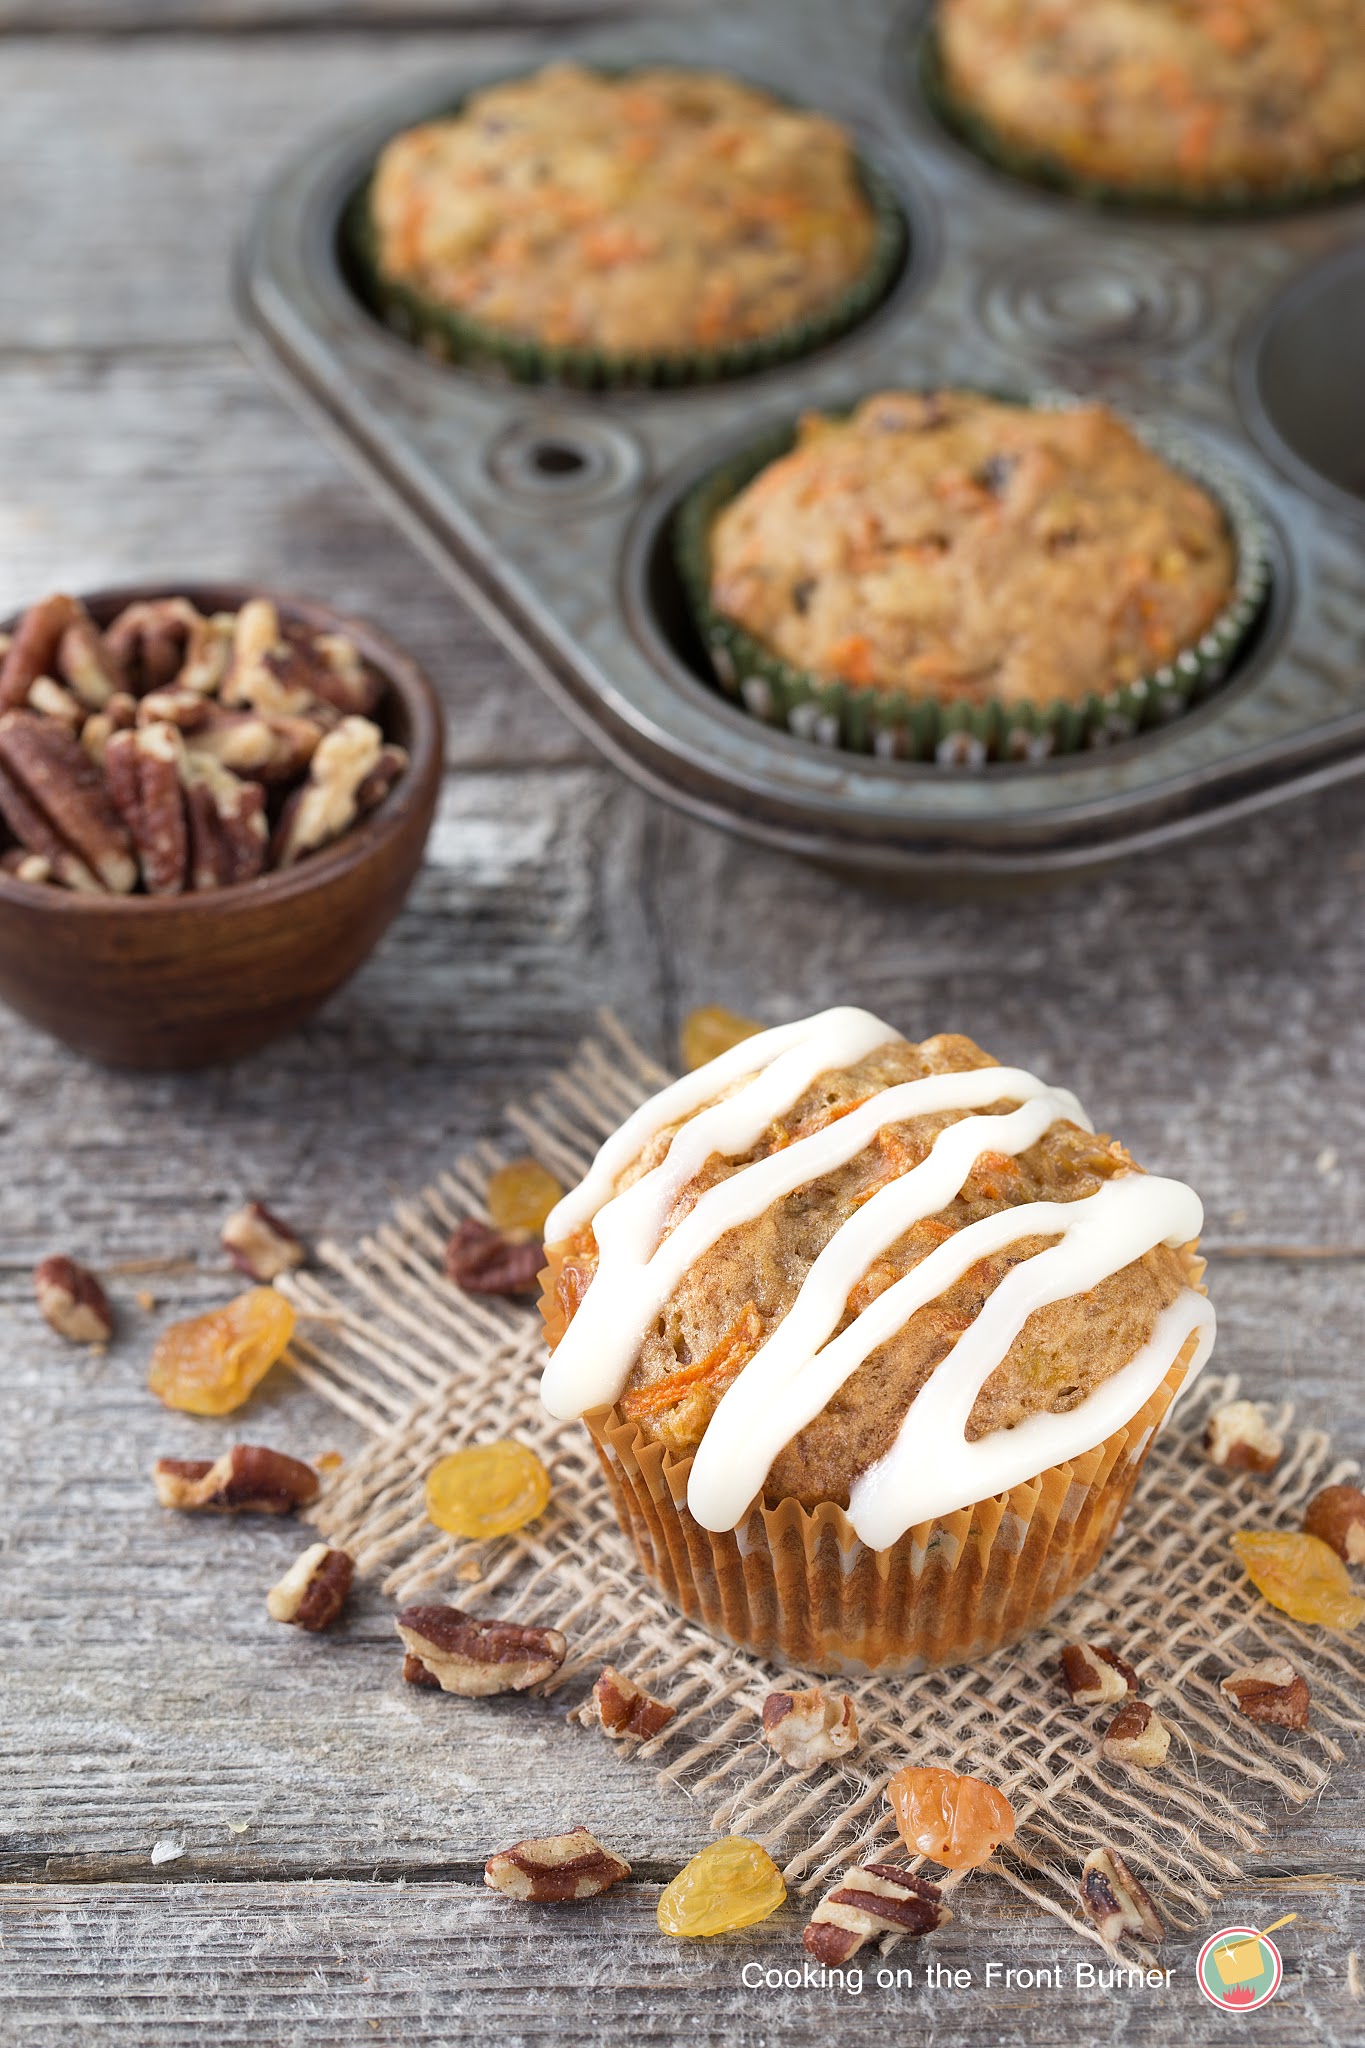 Carrot Cake Muffins with Cream Cheese Glaze from Cooking on the Front Burners